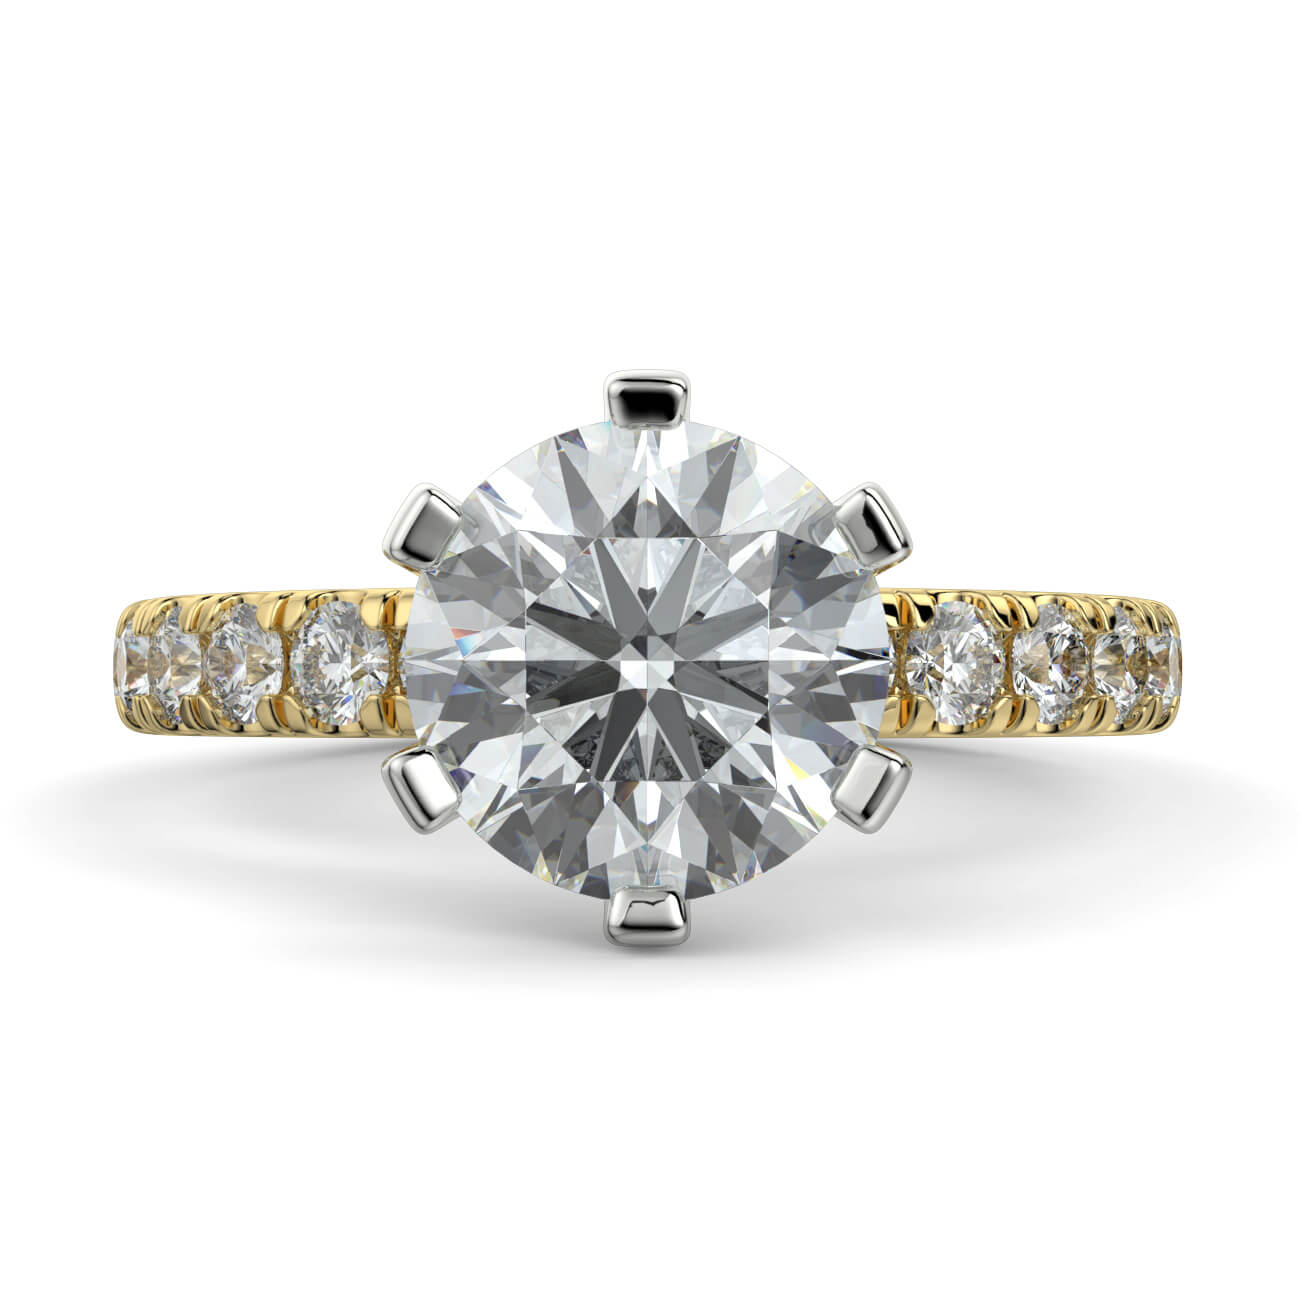 6 Claw Classic Pavé Diamond Engagement Ring in 18k Yellow and White Gold – Australian Diamond Network